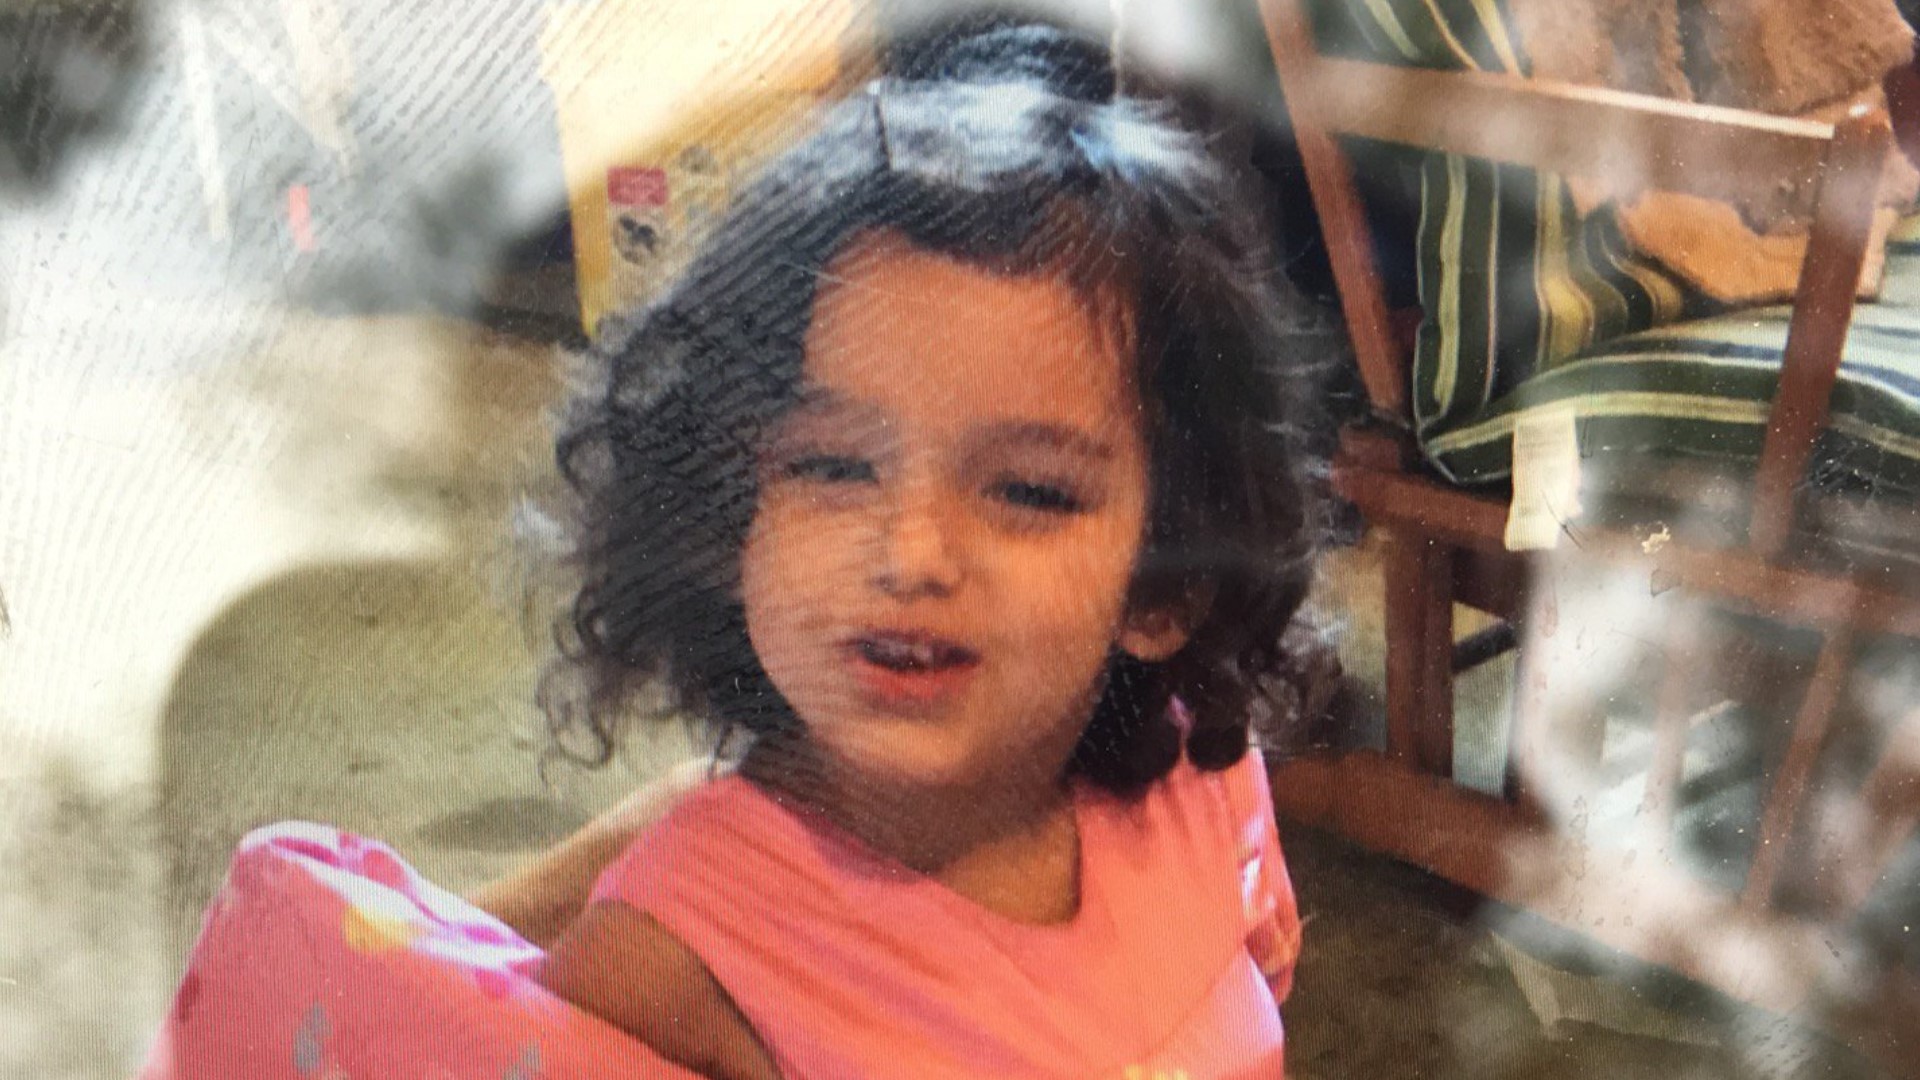 Michigan State Police and the Oscoda County Sheriff's Office are looking for a 2-year-old Gabriella Roselynn Vitale who wandered away from a camp site on Reber Road west of M-33 in Comins Township.